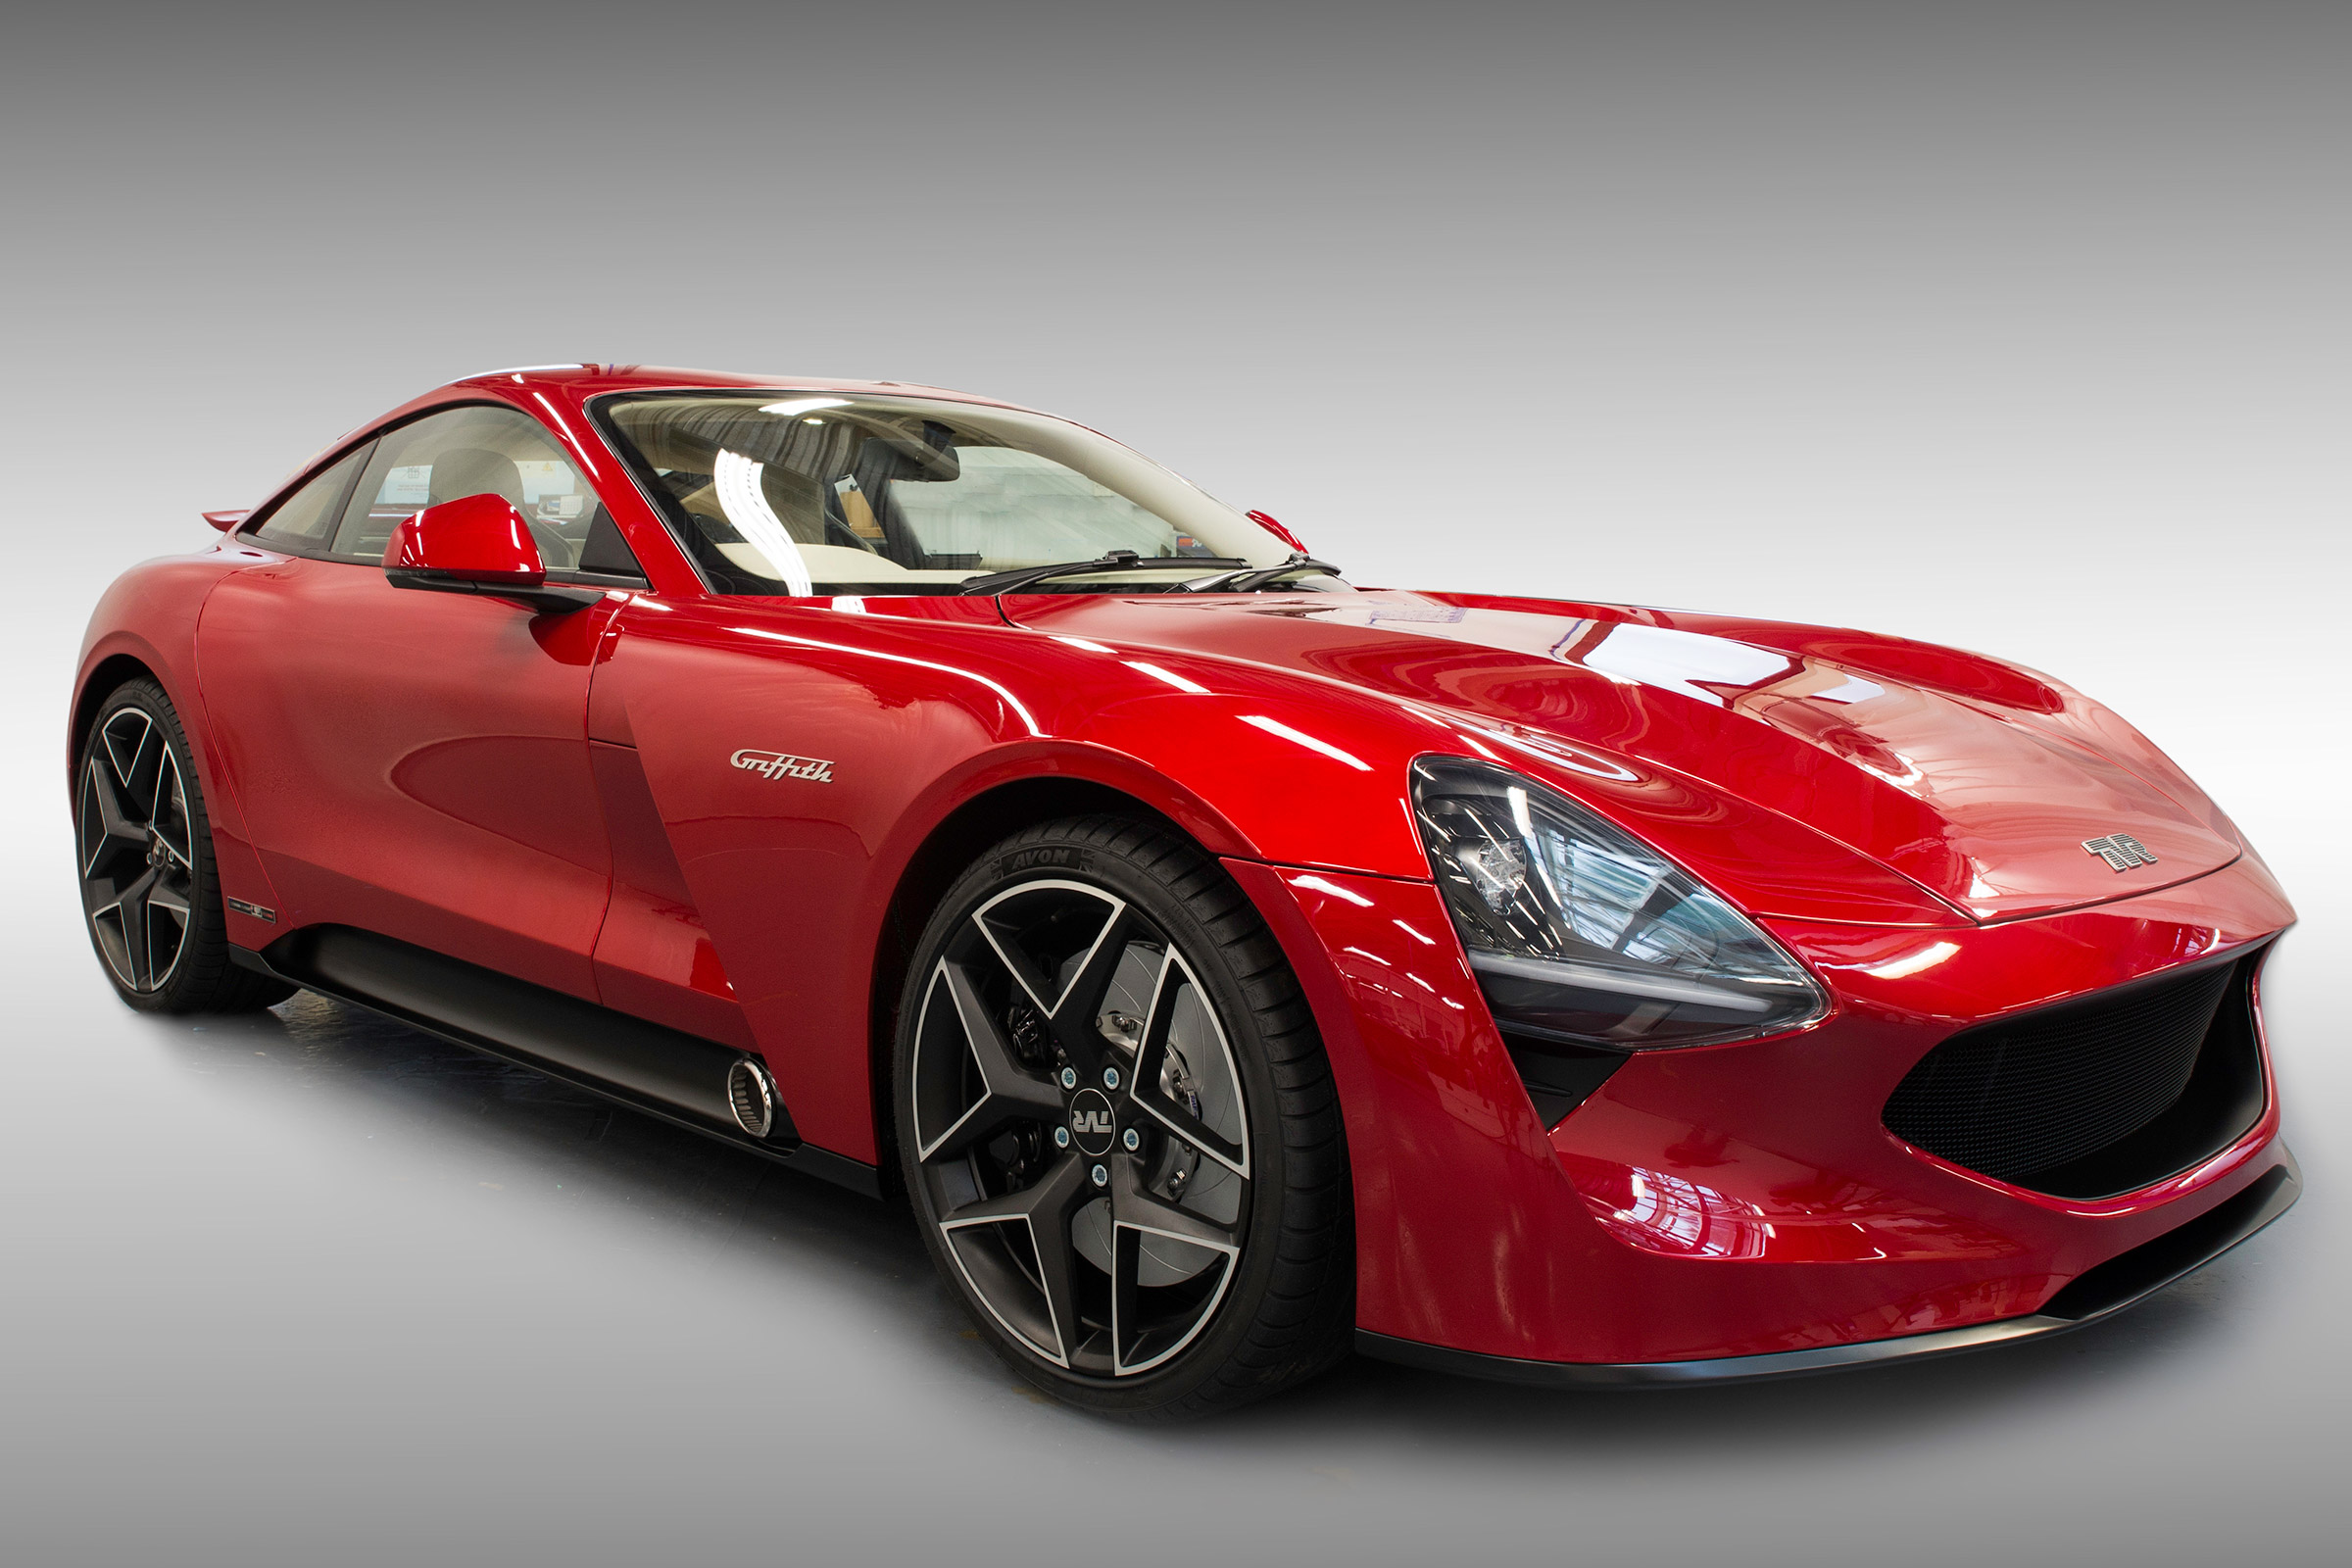 New TVR testing video reveals 2018 Griffith's V8 bark 